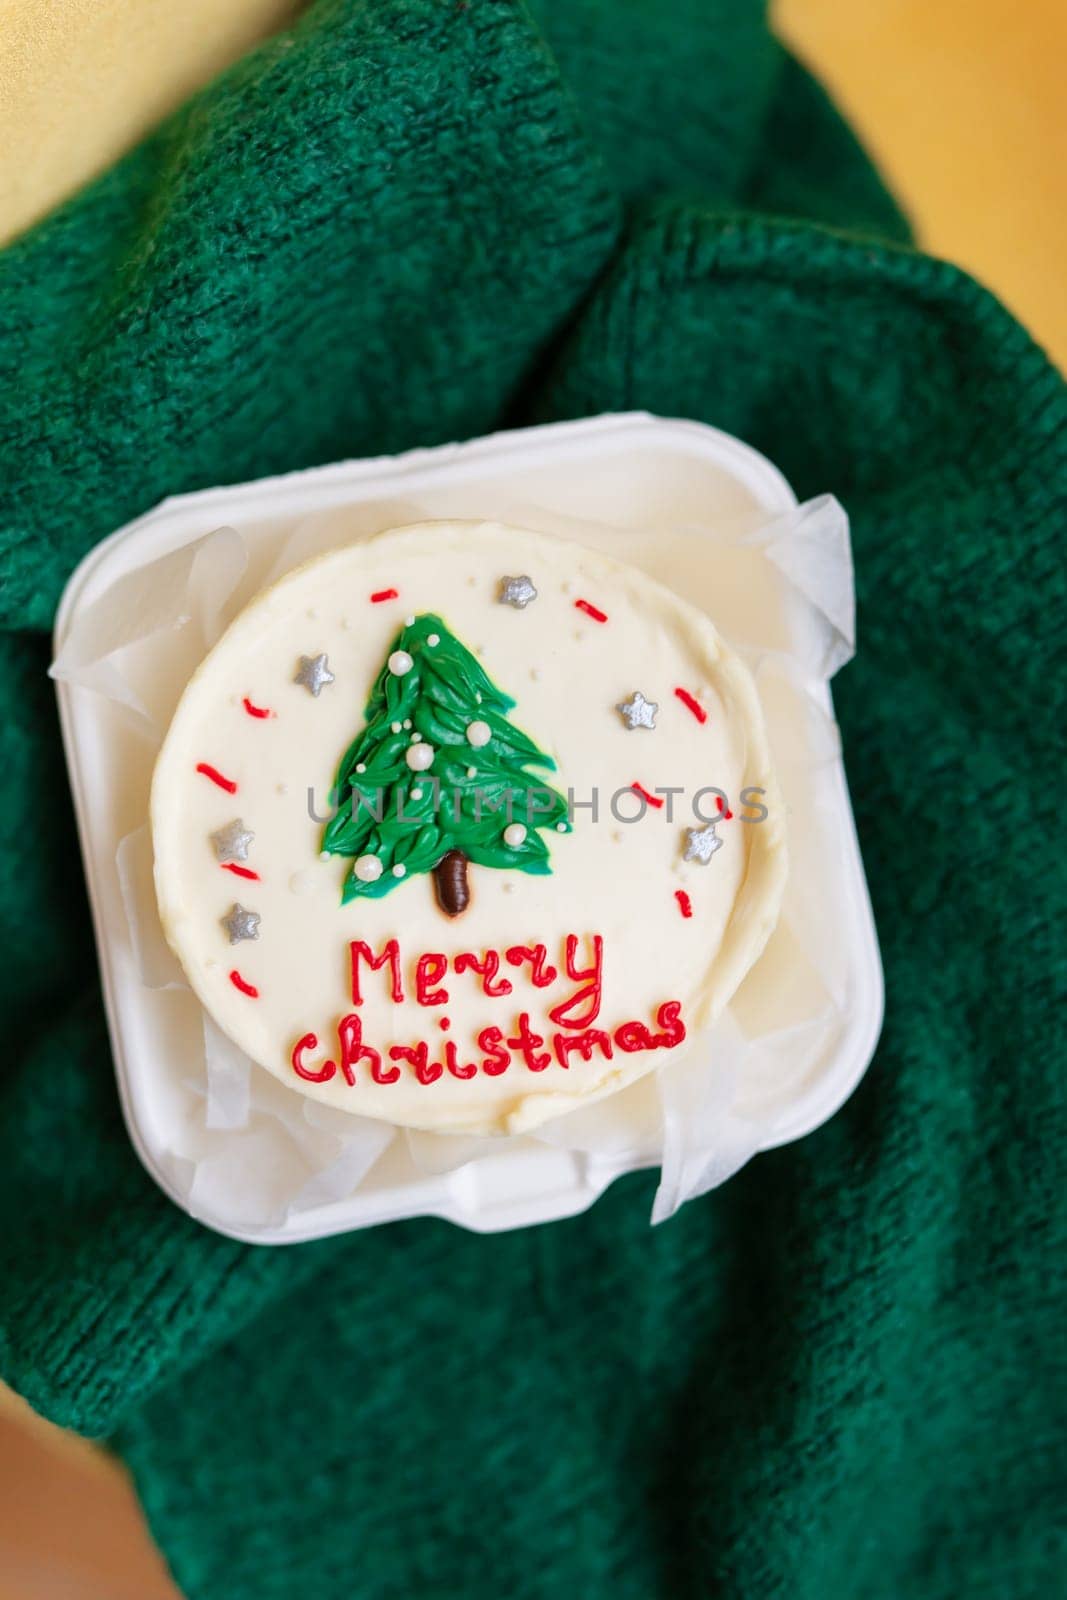 A festive Christmas cupcake with a green tree and red Merry Christmas text on a white frosting